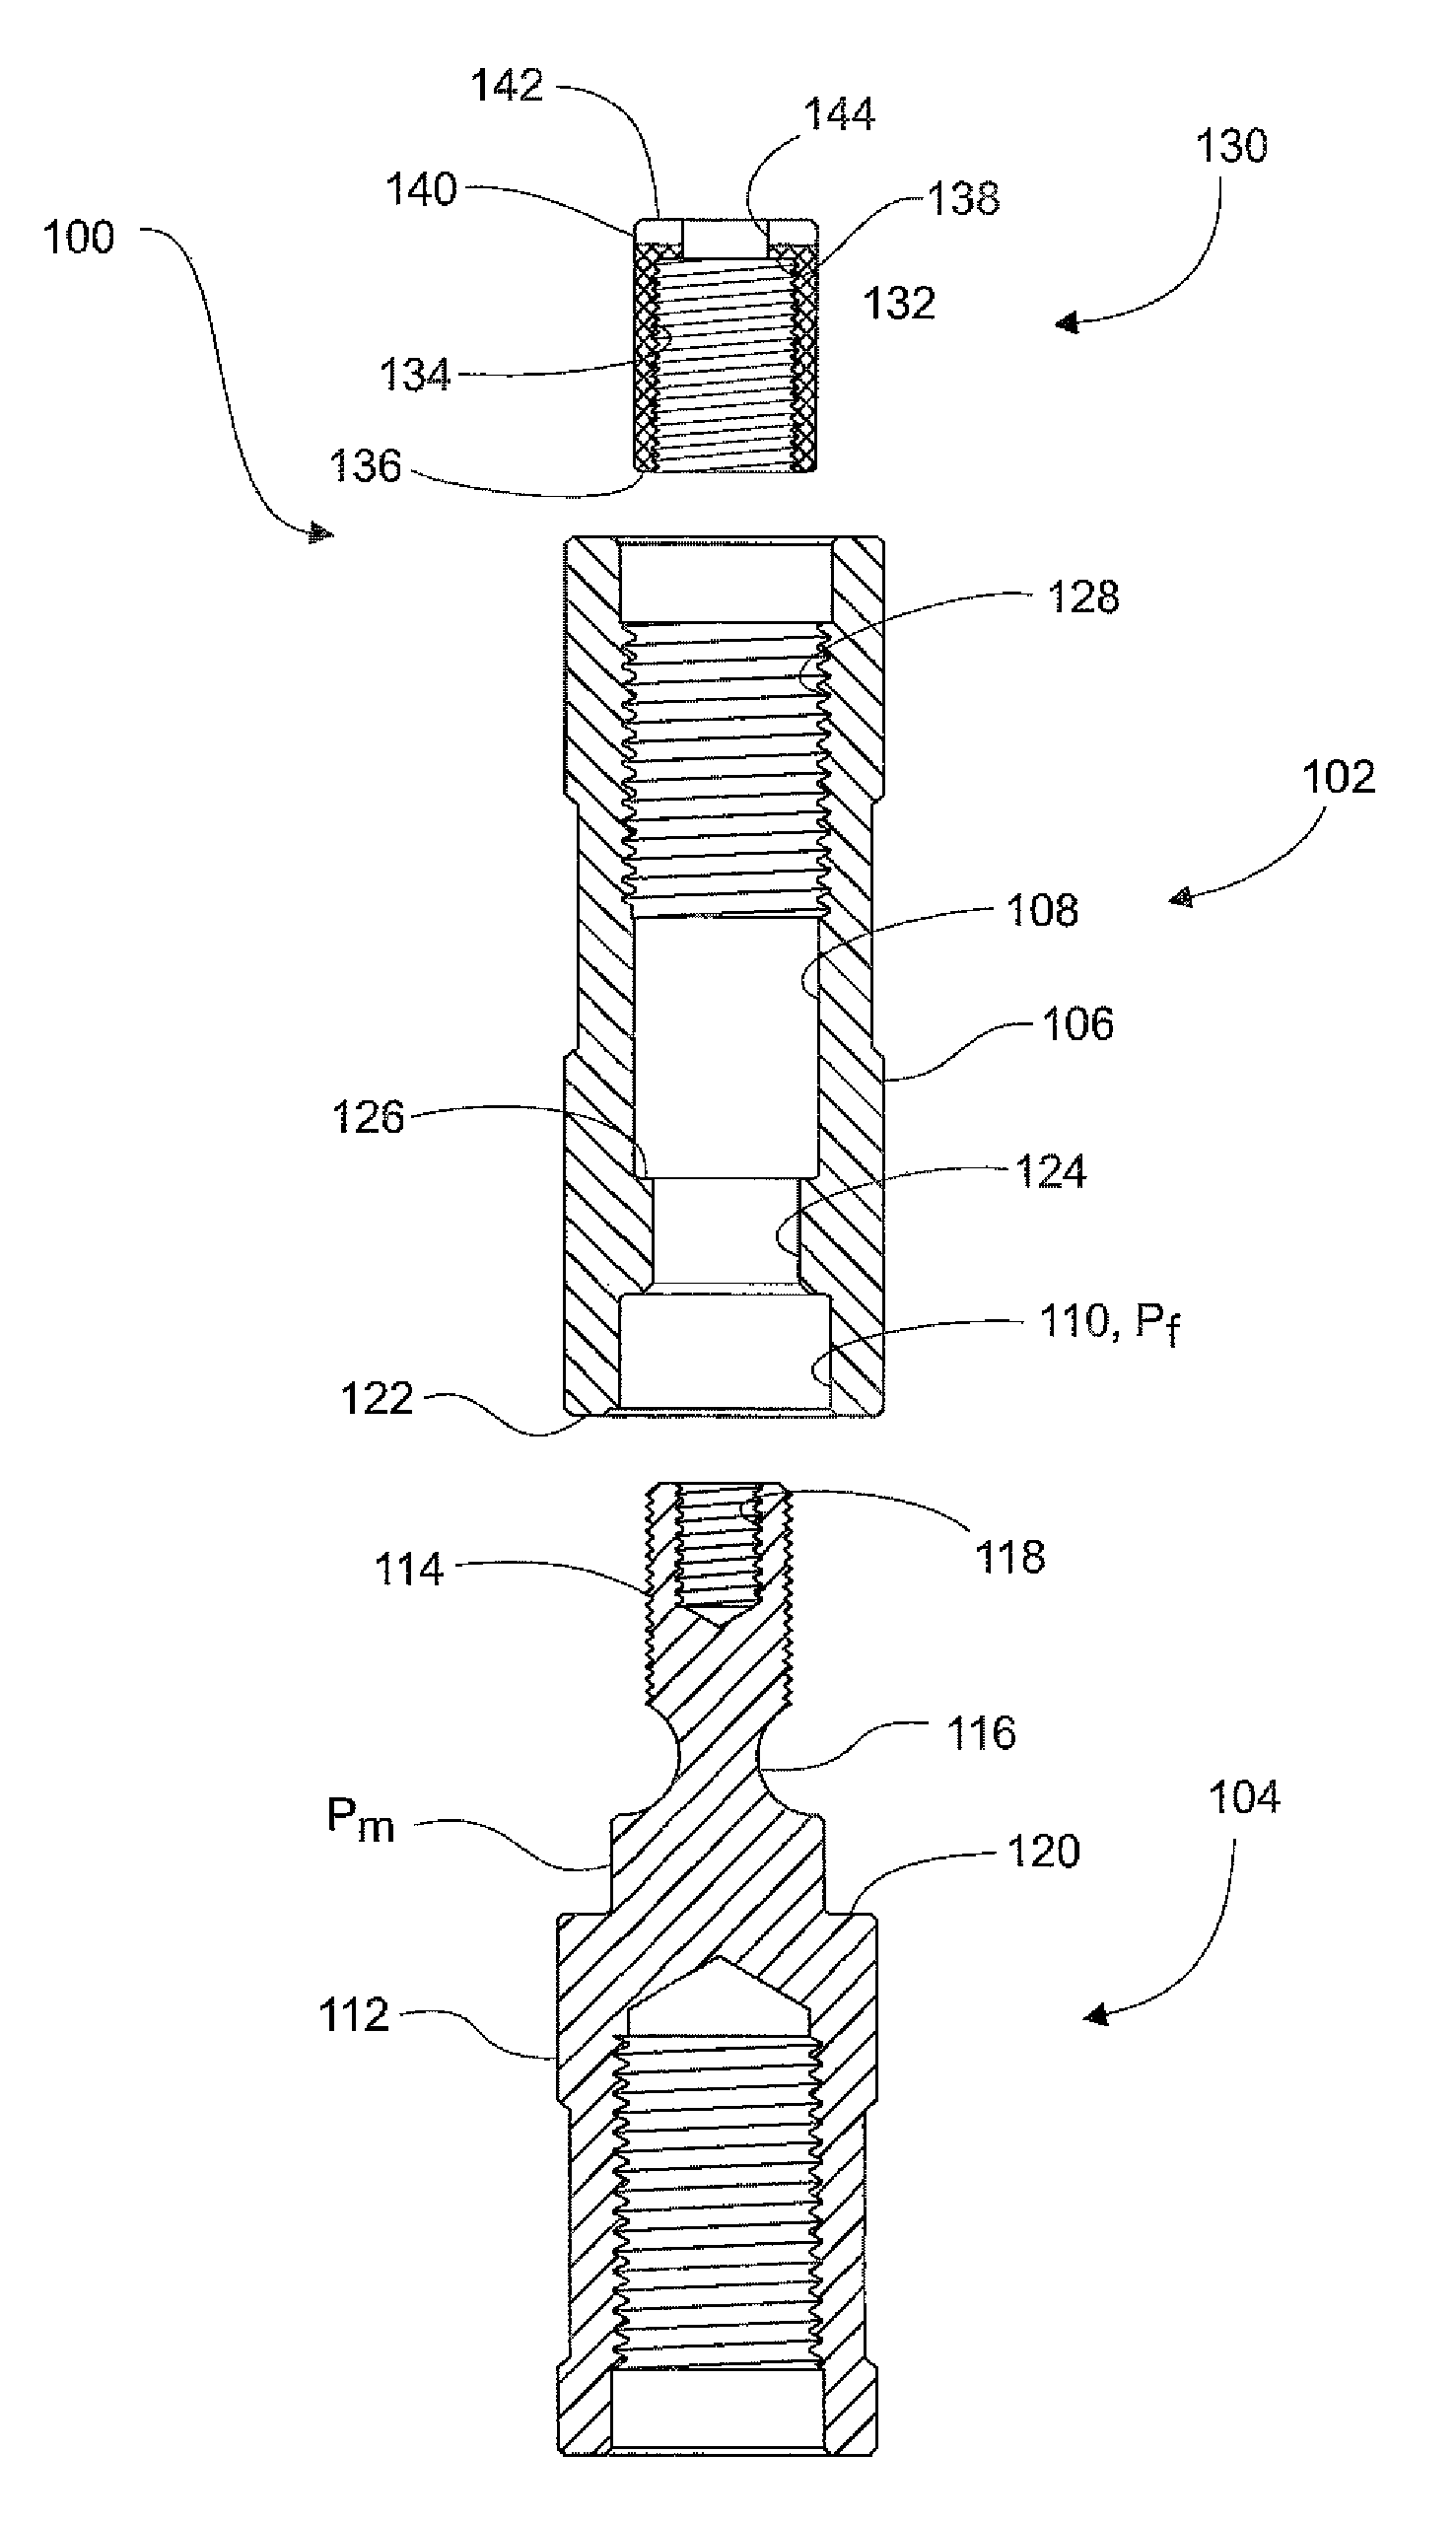 Shear coupling assembly for use with rotary and reciprocating pumps